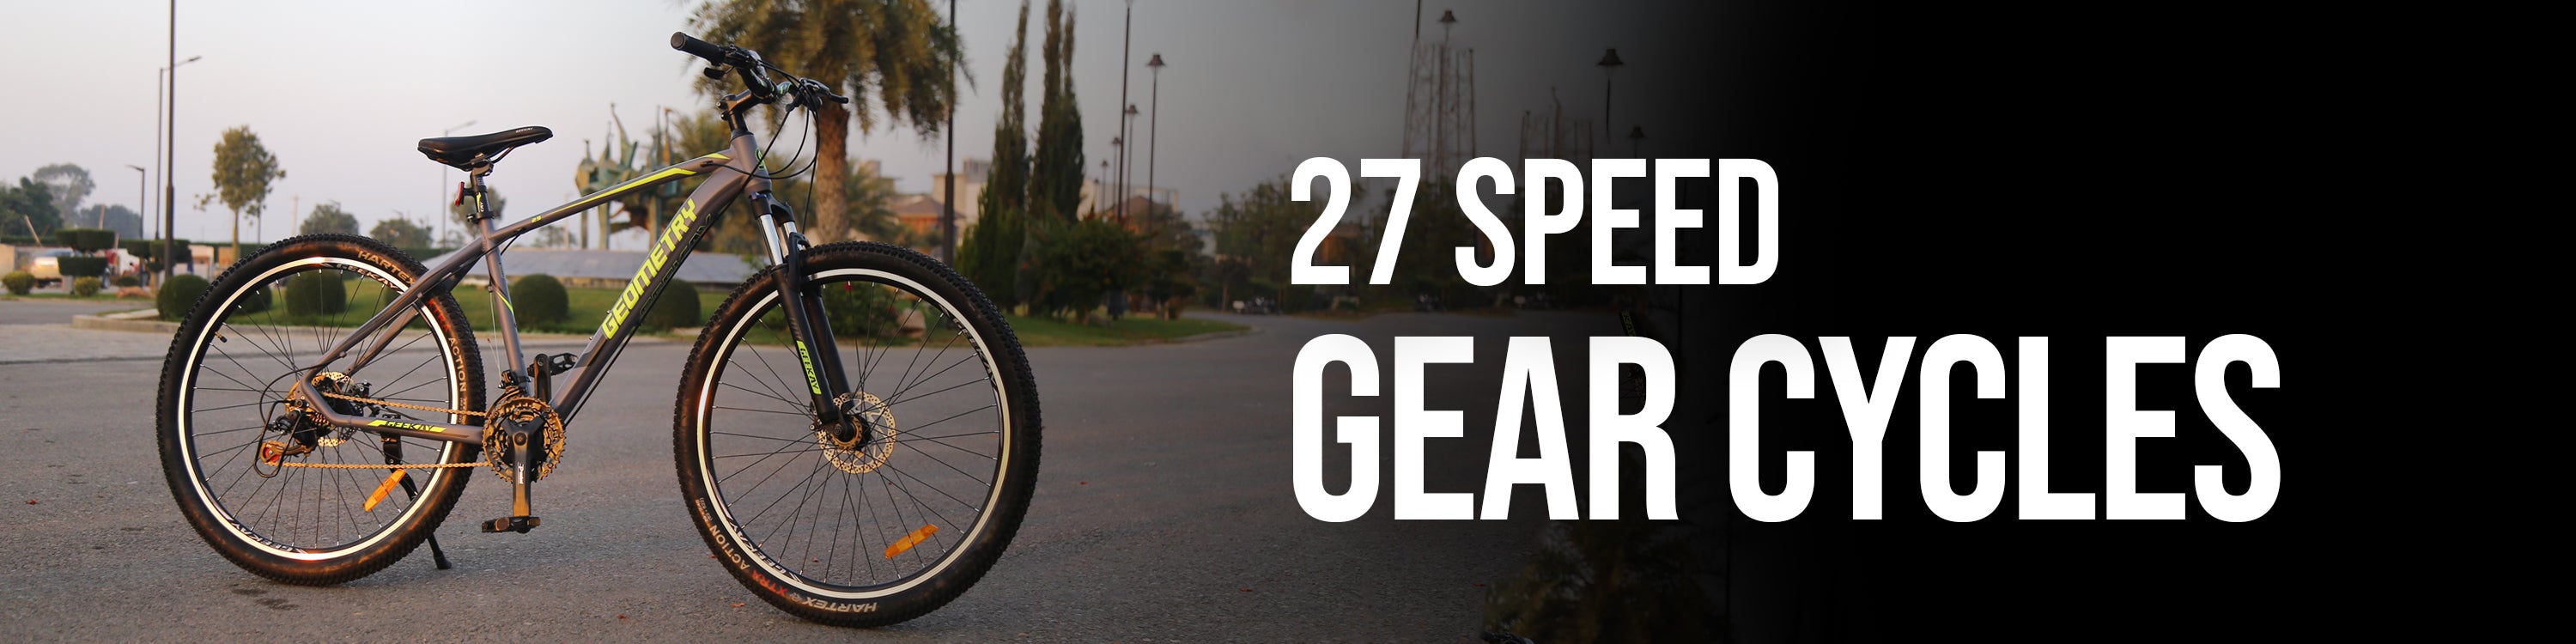 27 Speed Gear Cycles